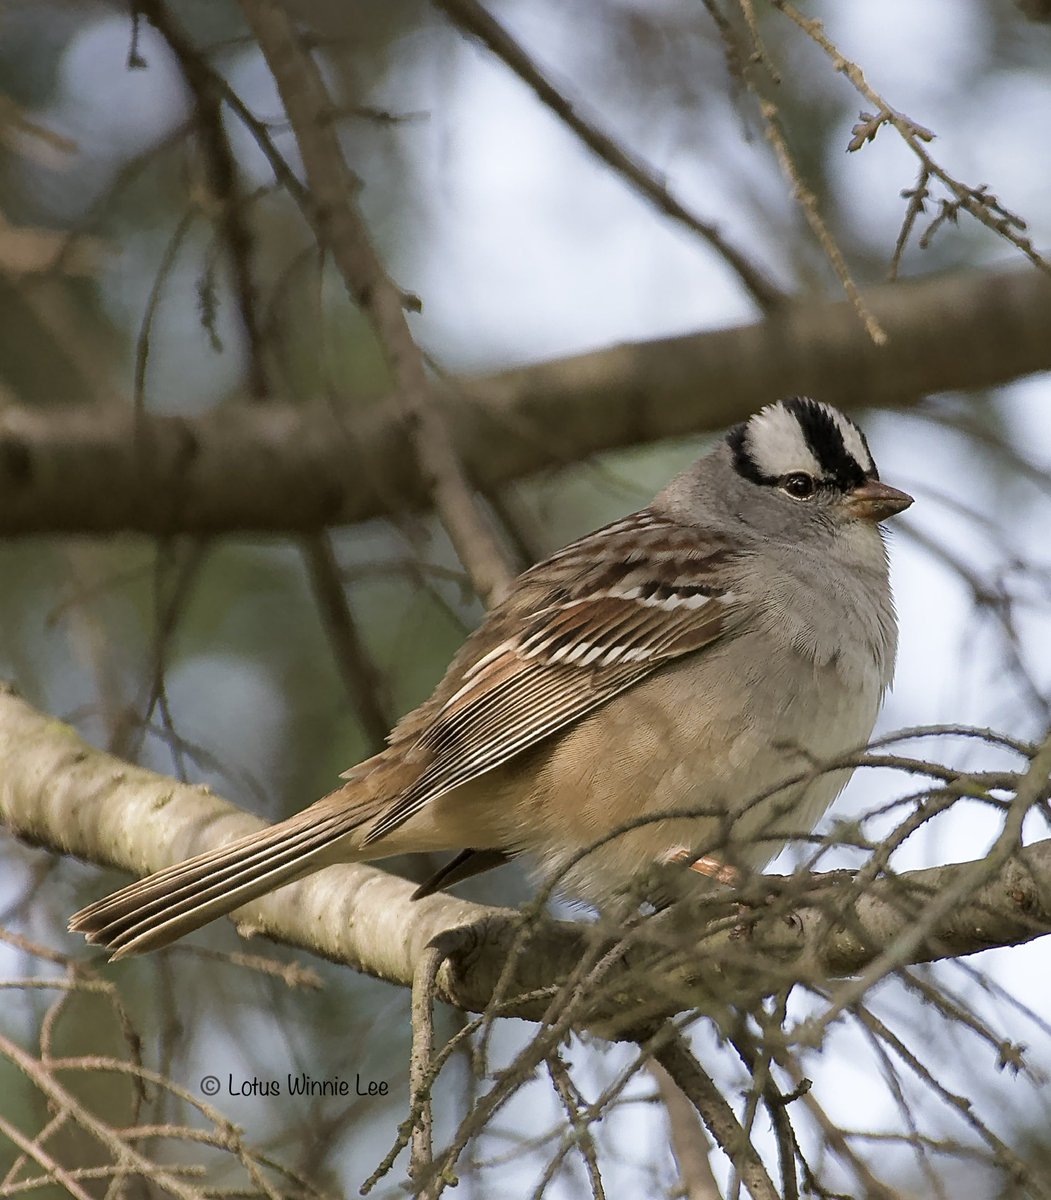 White-crowned Sparrow perched inside an Evergreen ⁦@GreenWoodHF⁩ in Brooklyn. #whitecrownedsparrow #sparrows #birdwatching #wildlife